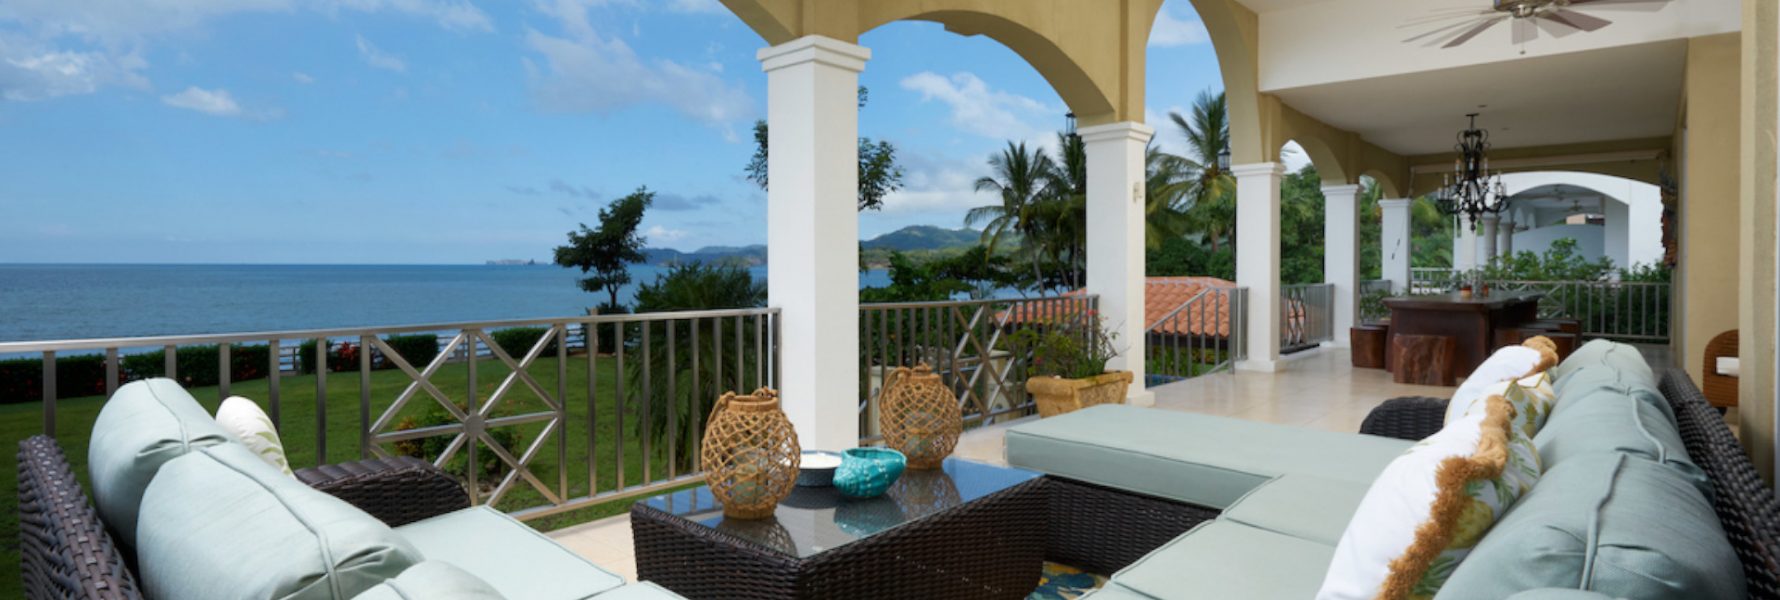 A beautiful beach front view, you can sit back and enjoy from the porch.